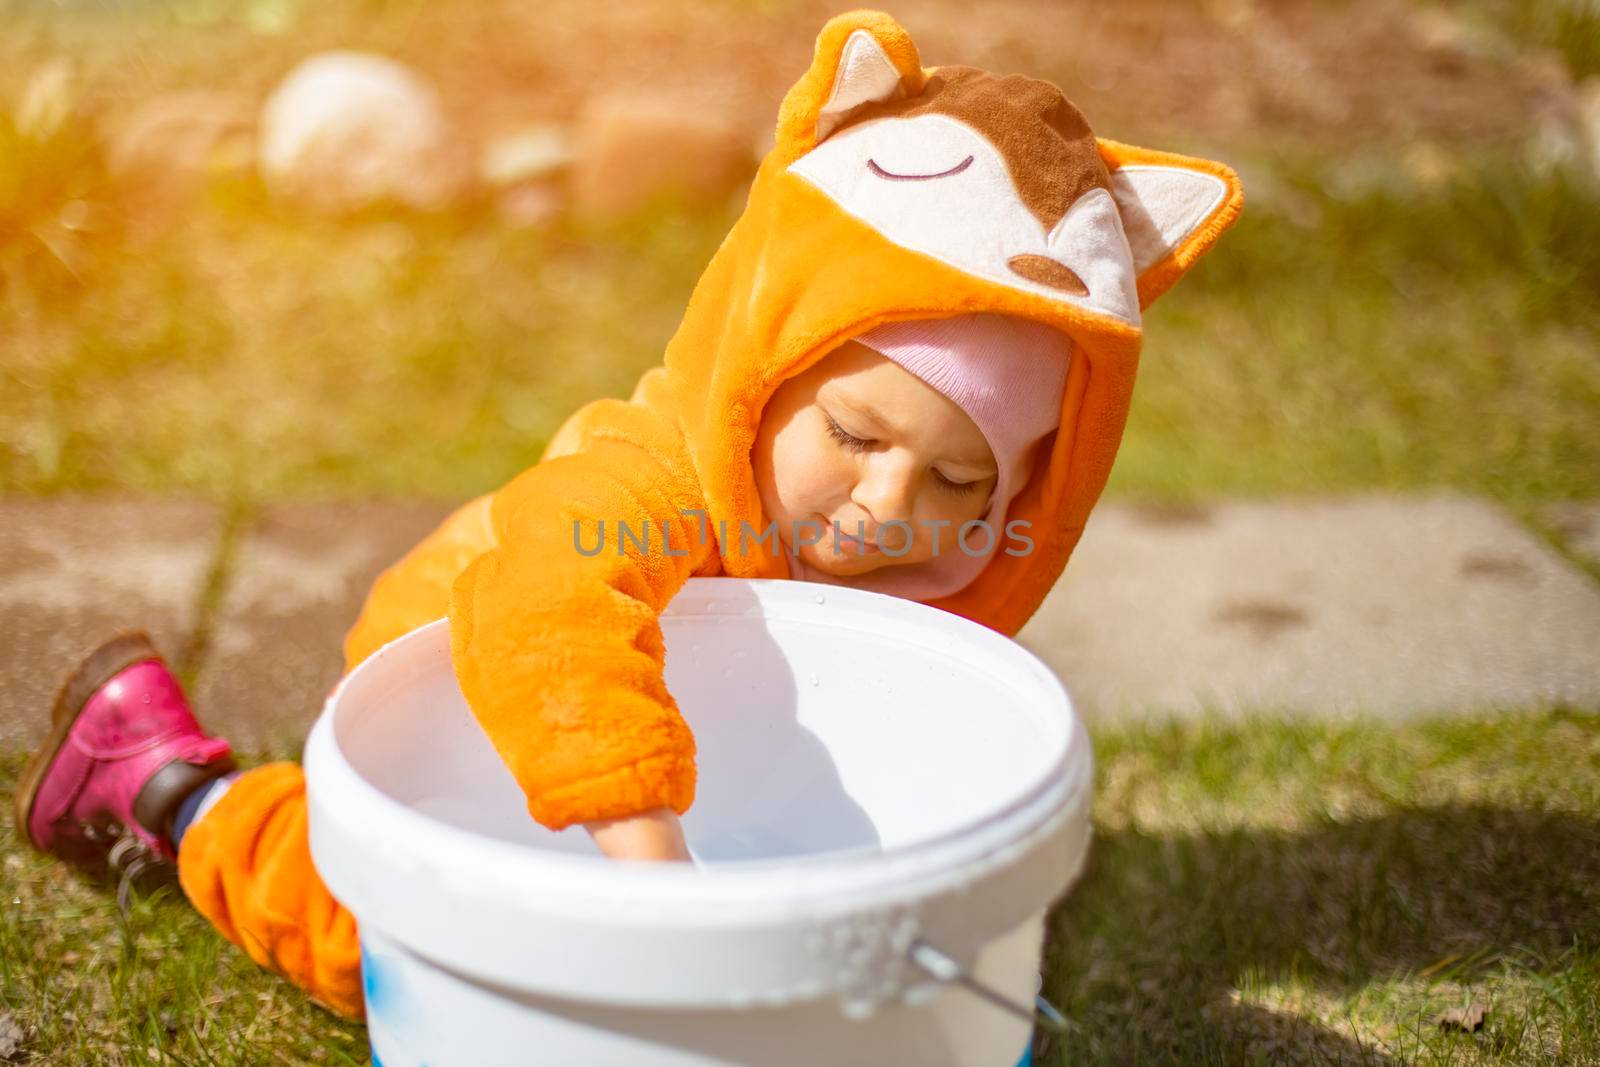 adorable little toddler playing with water in the backyard in sunshine. child in a fox costume